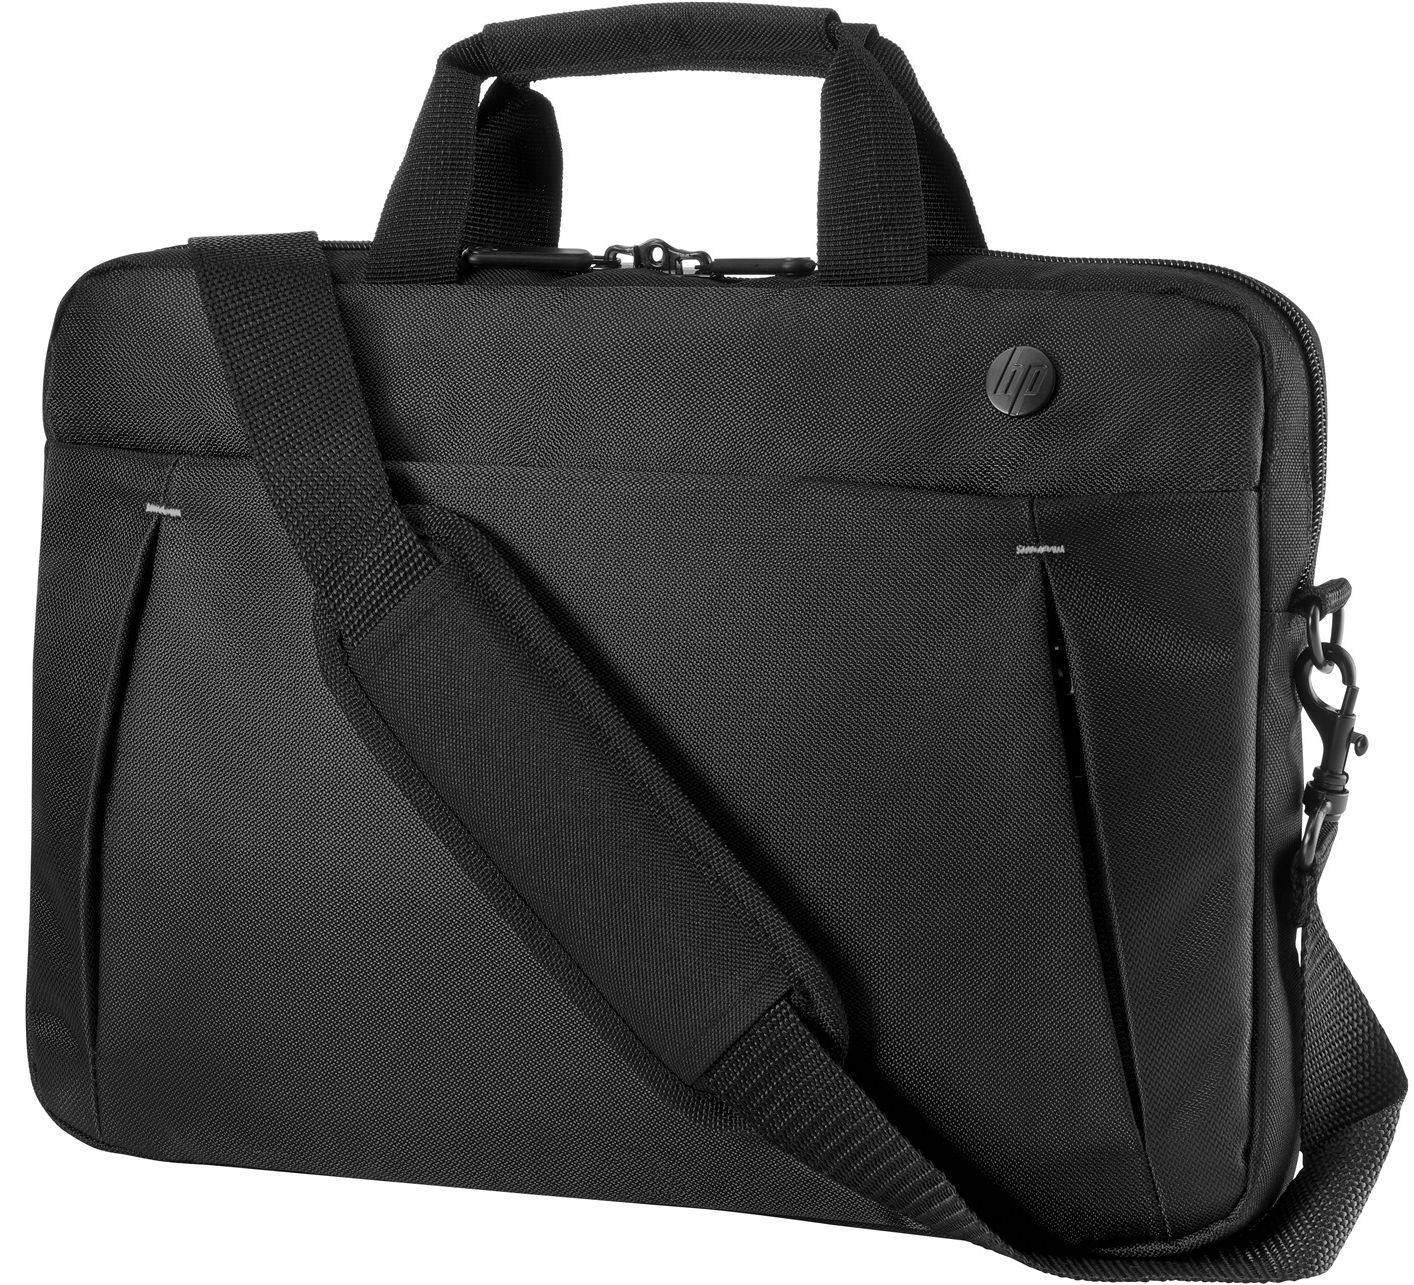 HP GENUINE 13 14 Inch Notebook Laptop Carry Bag Case 430 640 830 G6 ...